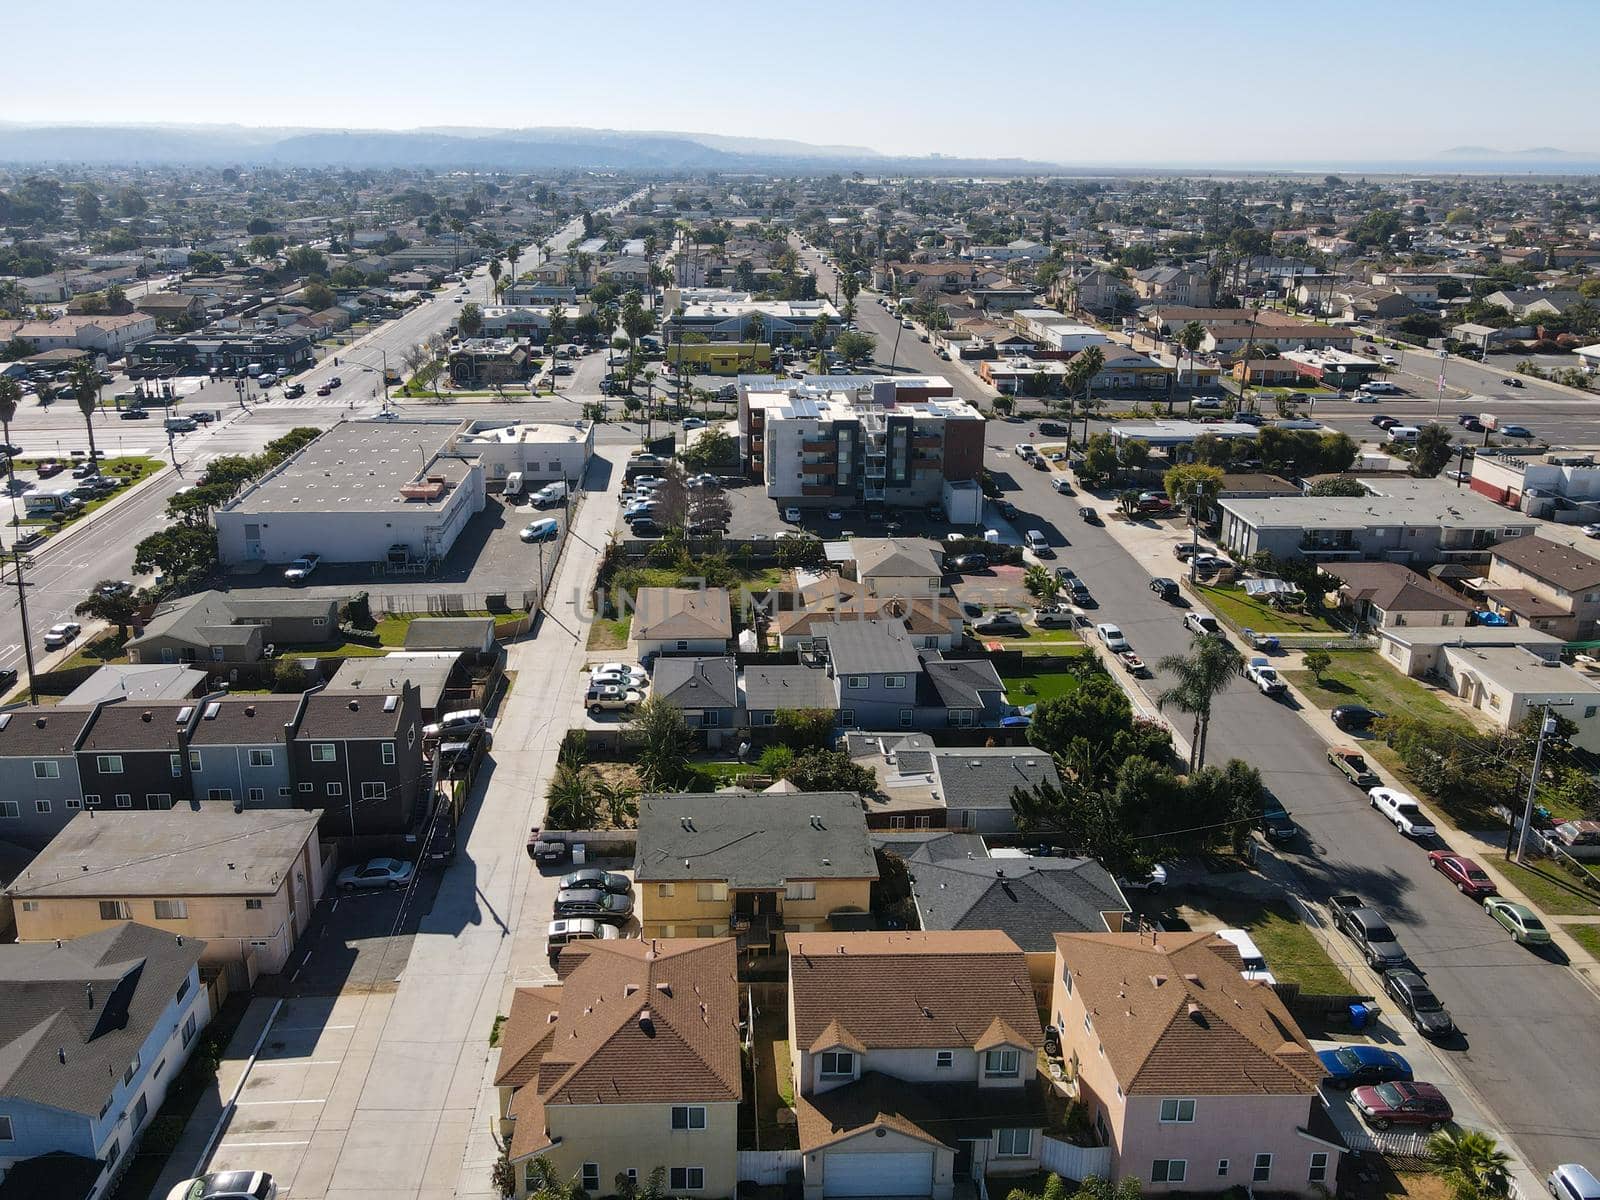 Aerial view of street and houses in Imperial Beach area in San Diego, California, USA